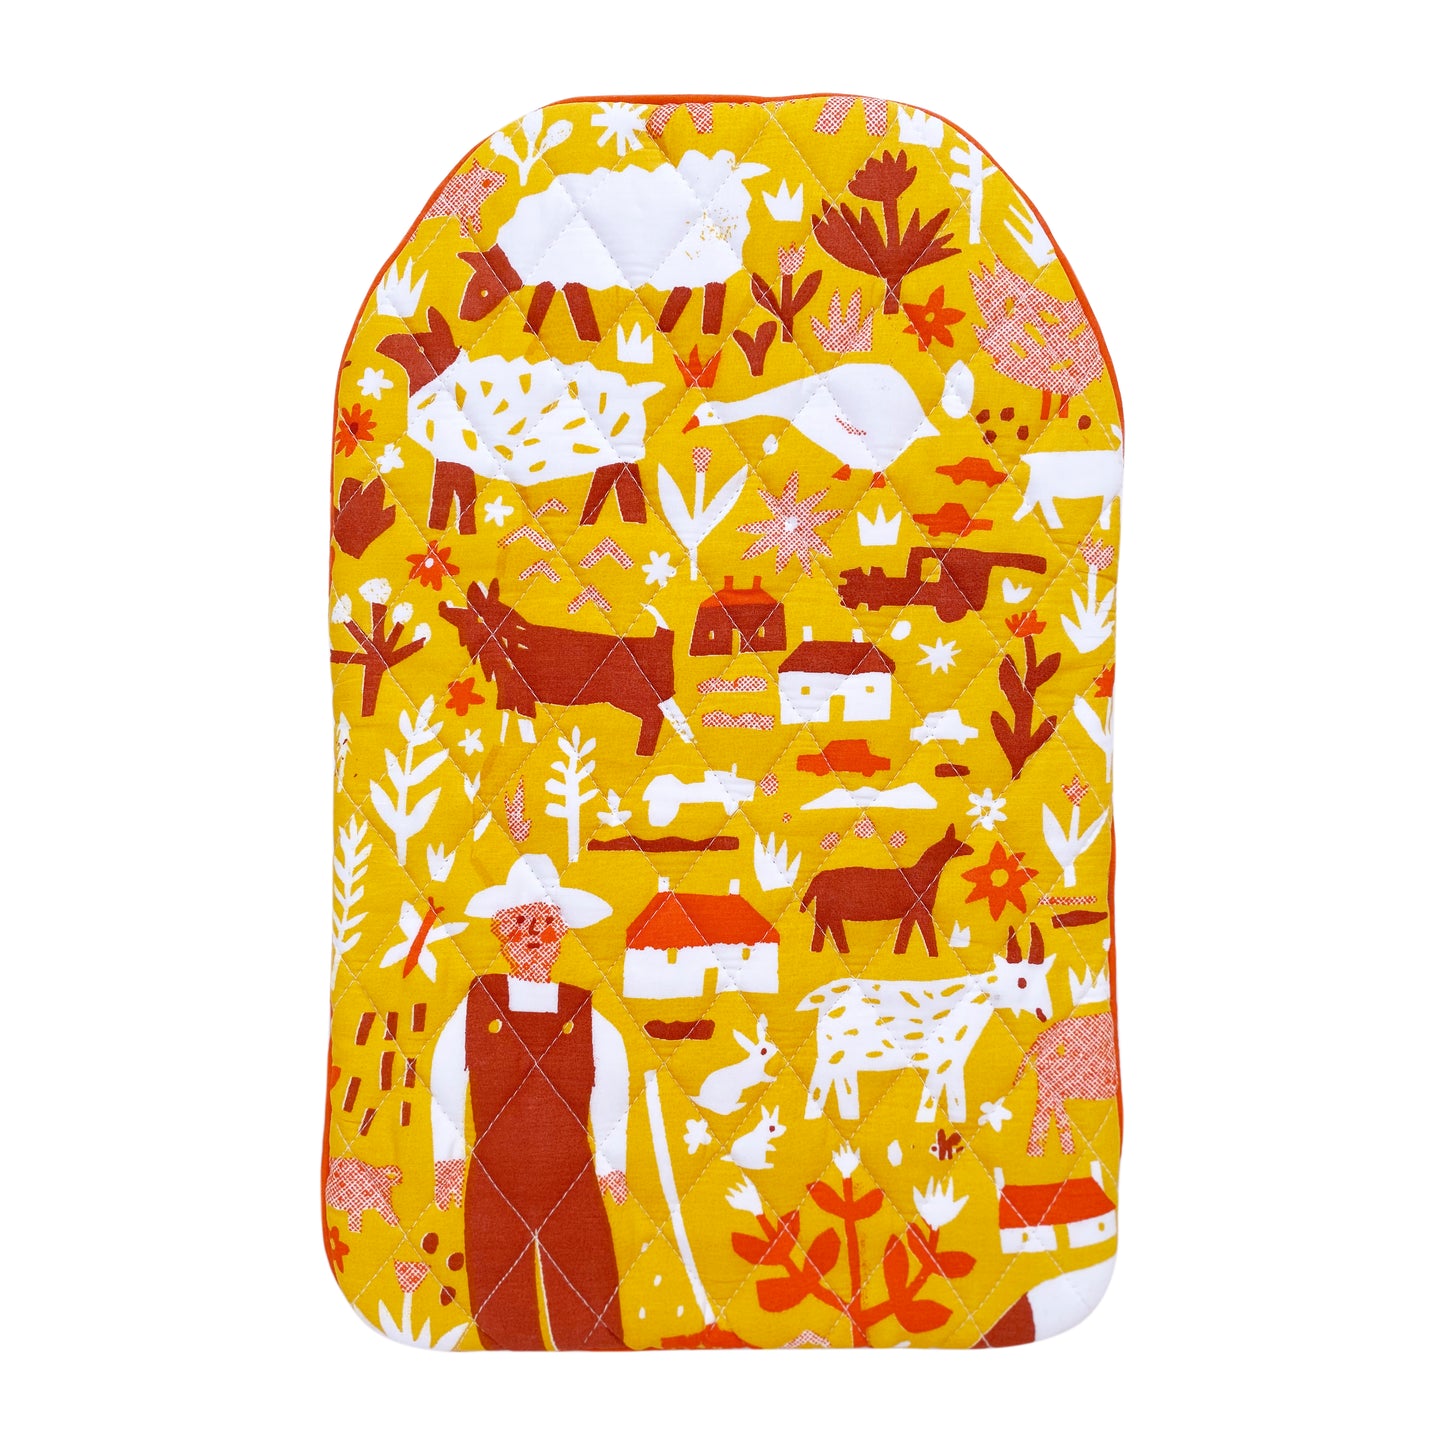 Farm Life Hot Water Bottle Cover